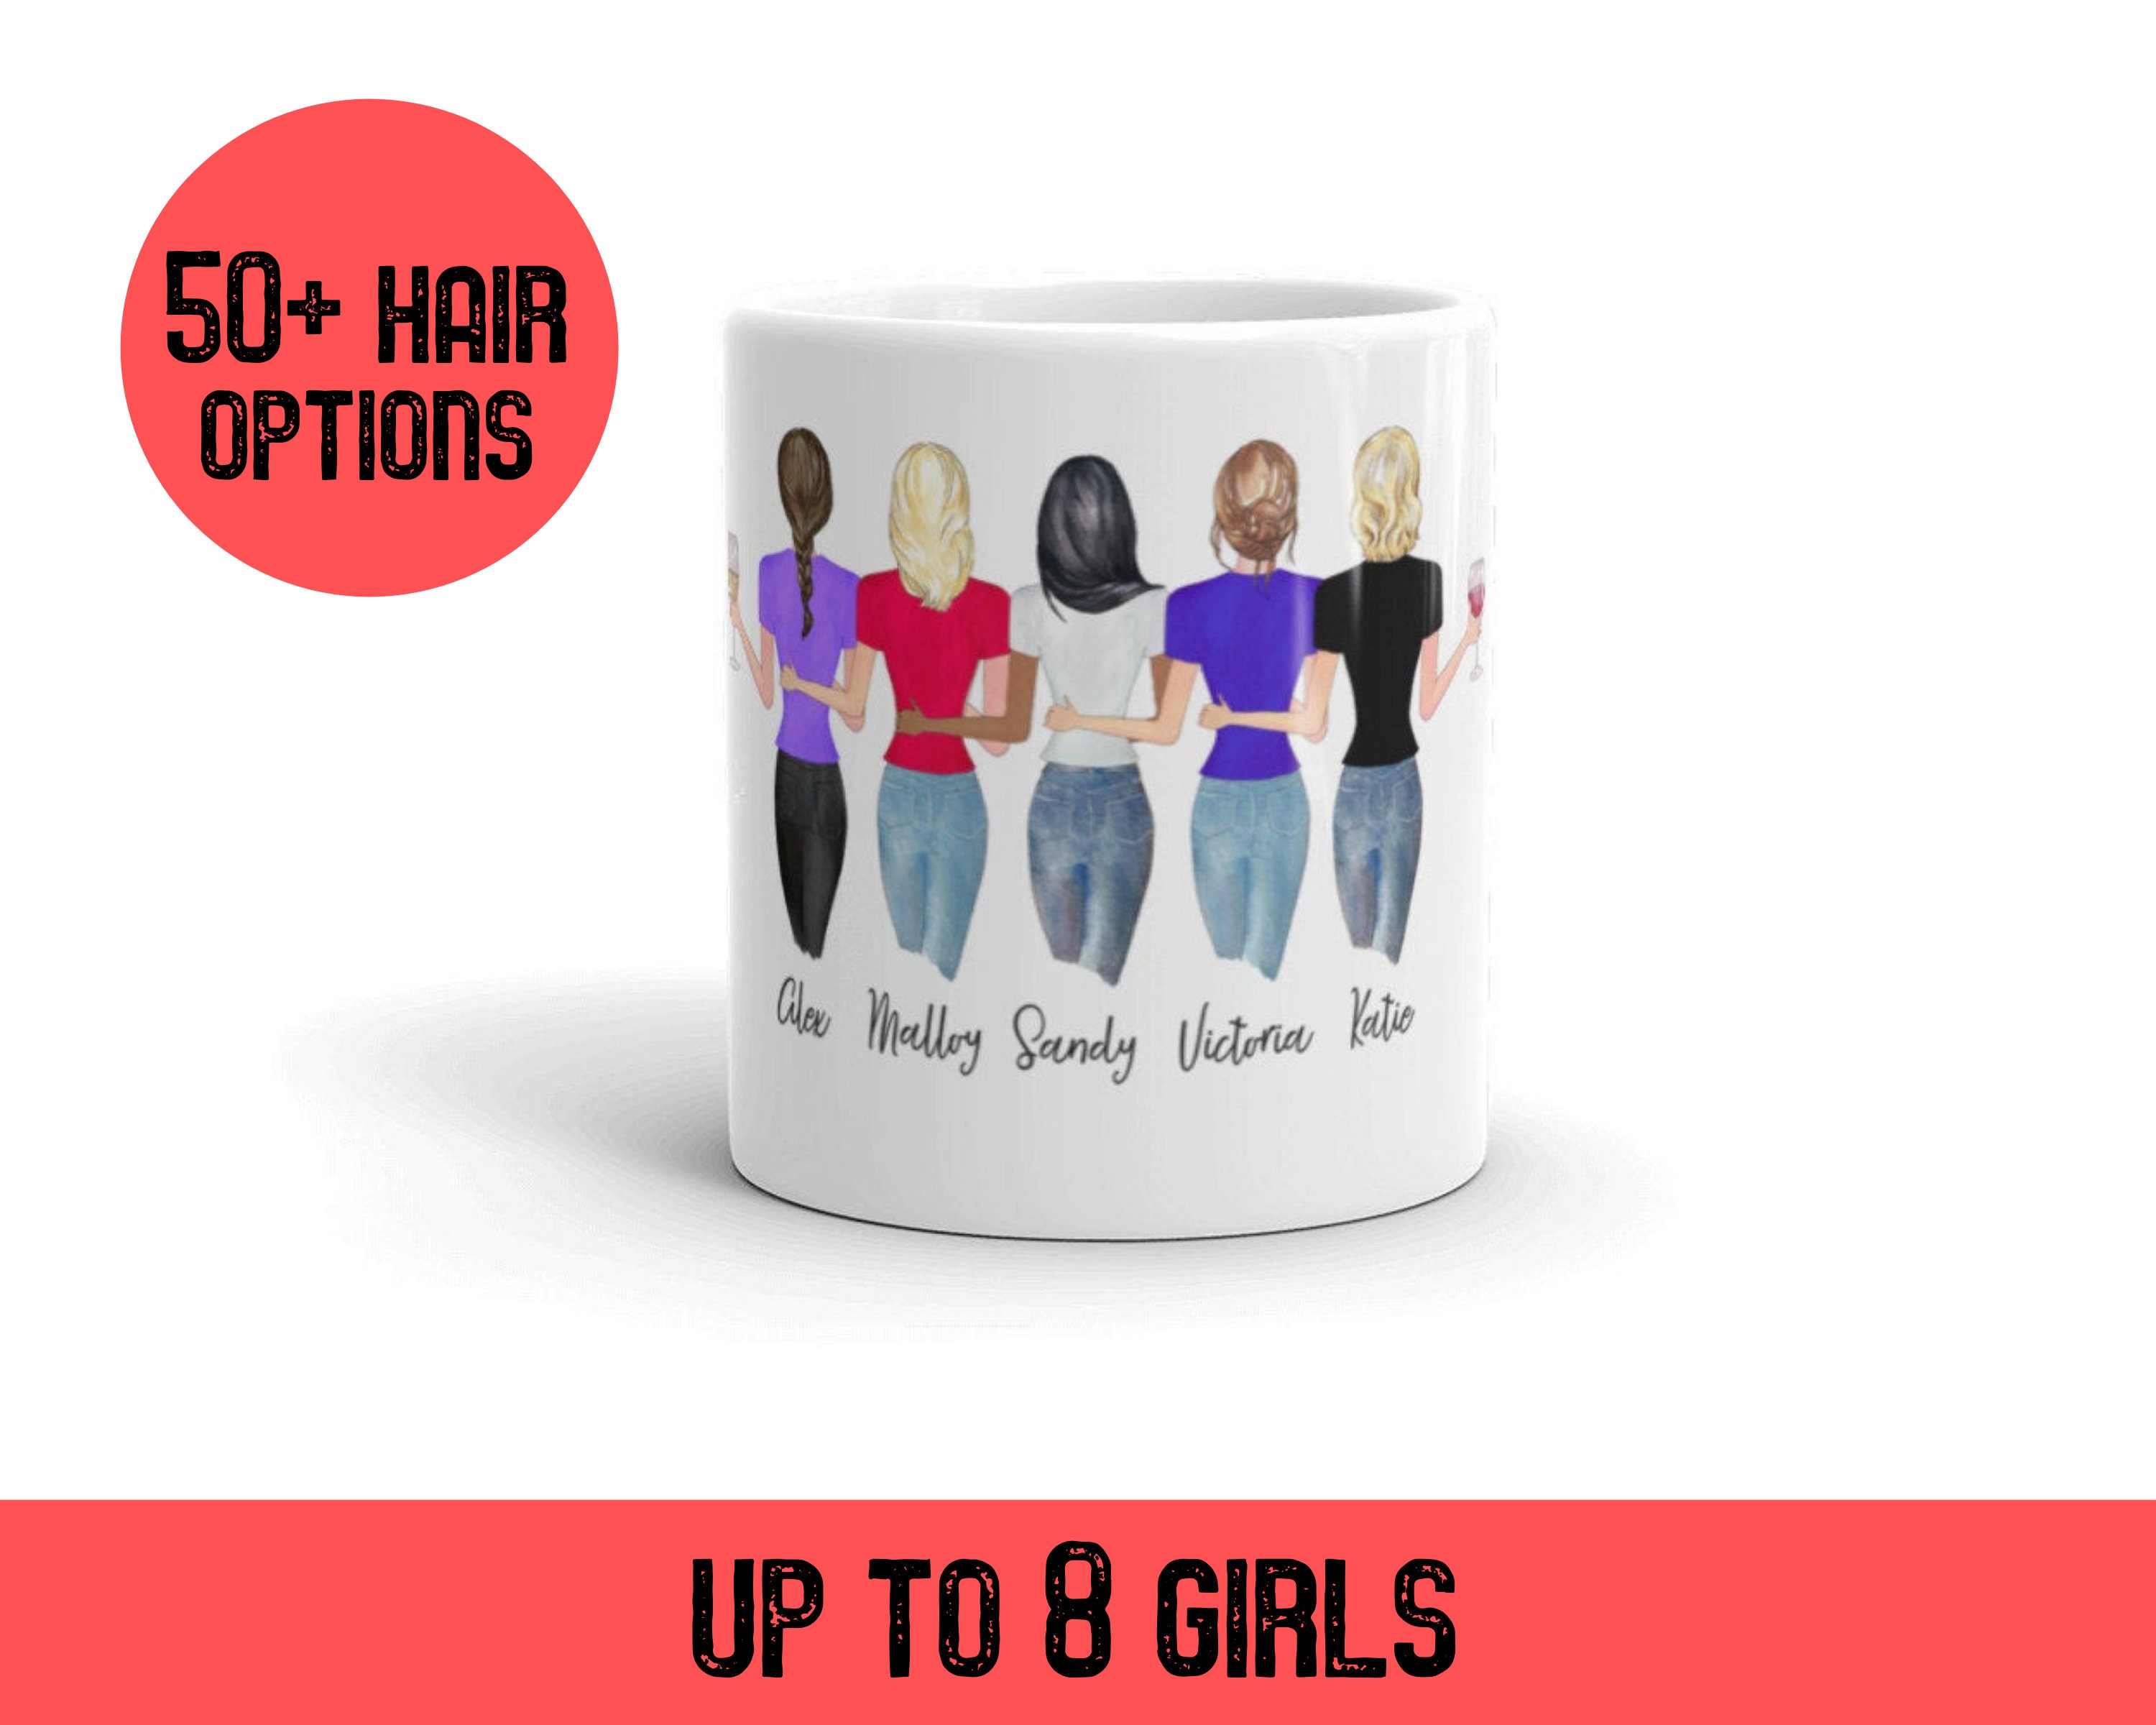 Personalized Mug - Drink Team - Drinks Are Best When Mixed With Friends